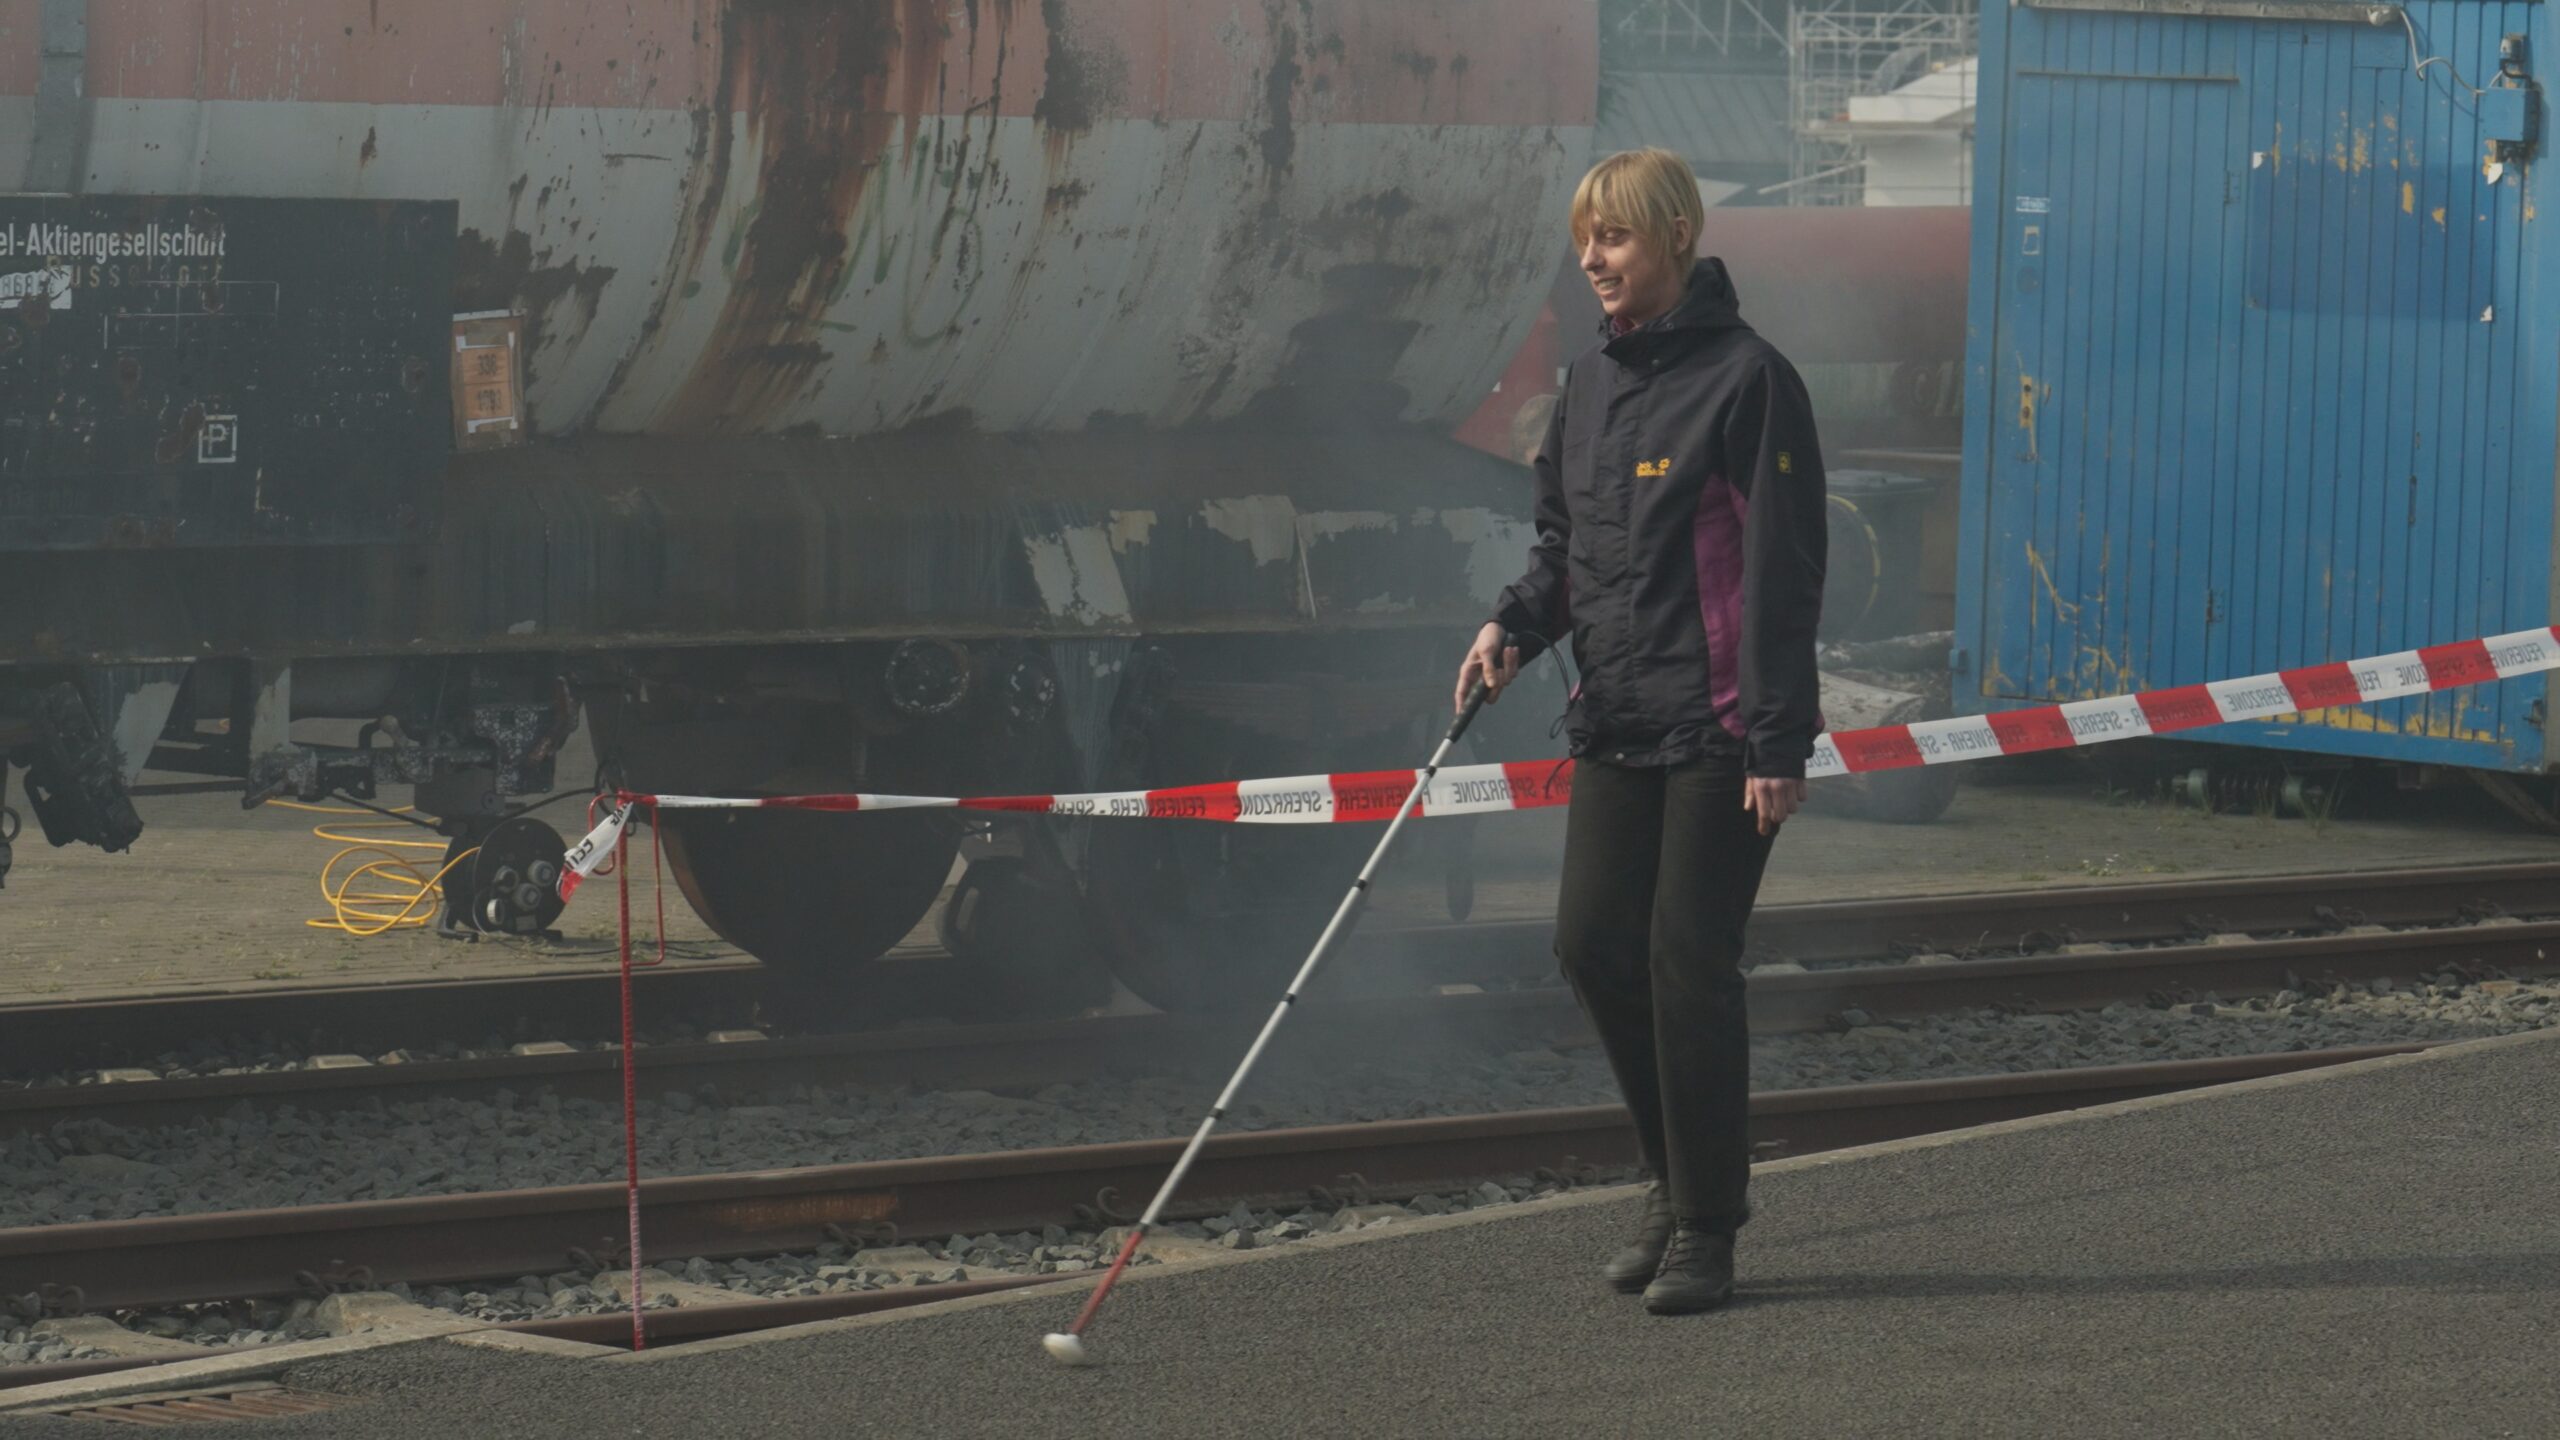 A blind participant is walking with her walking stick at the incident site